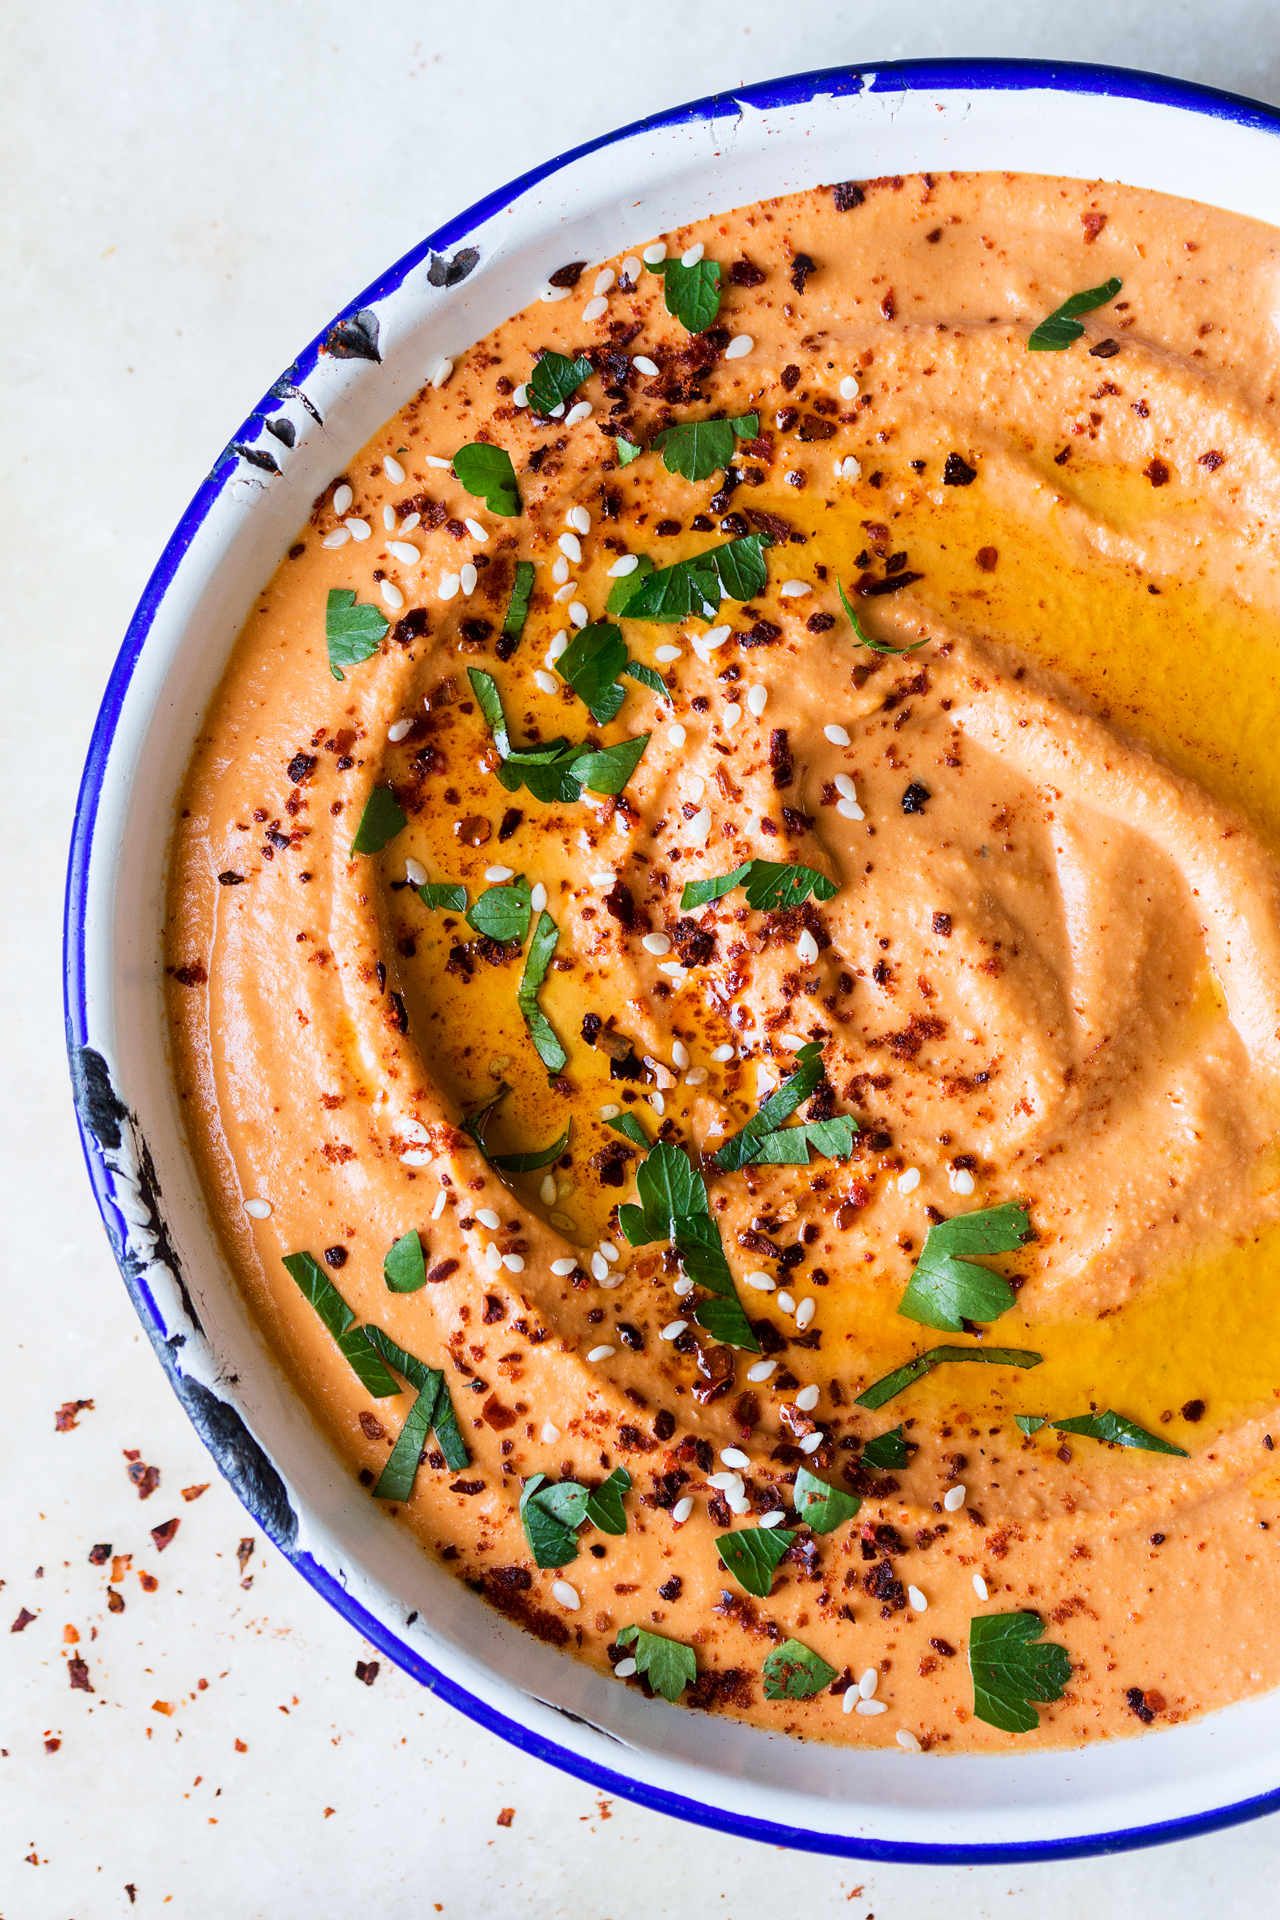 Spicy roasted red pepper hummus - Lazy Cat Kitchen